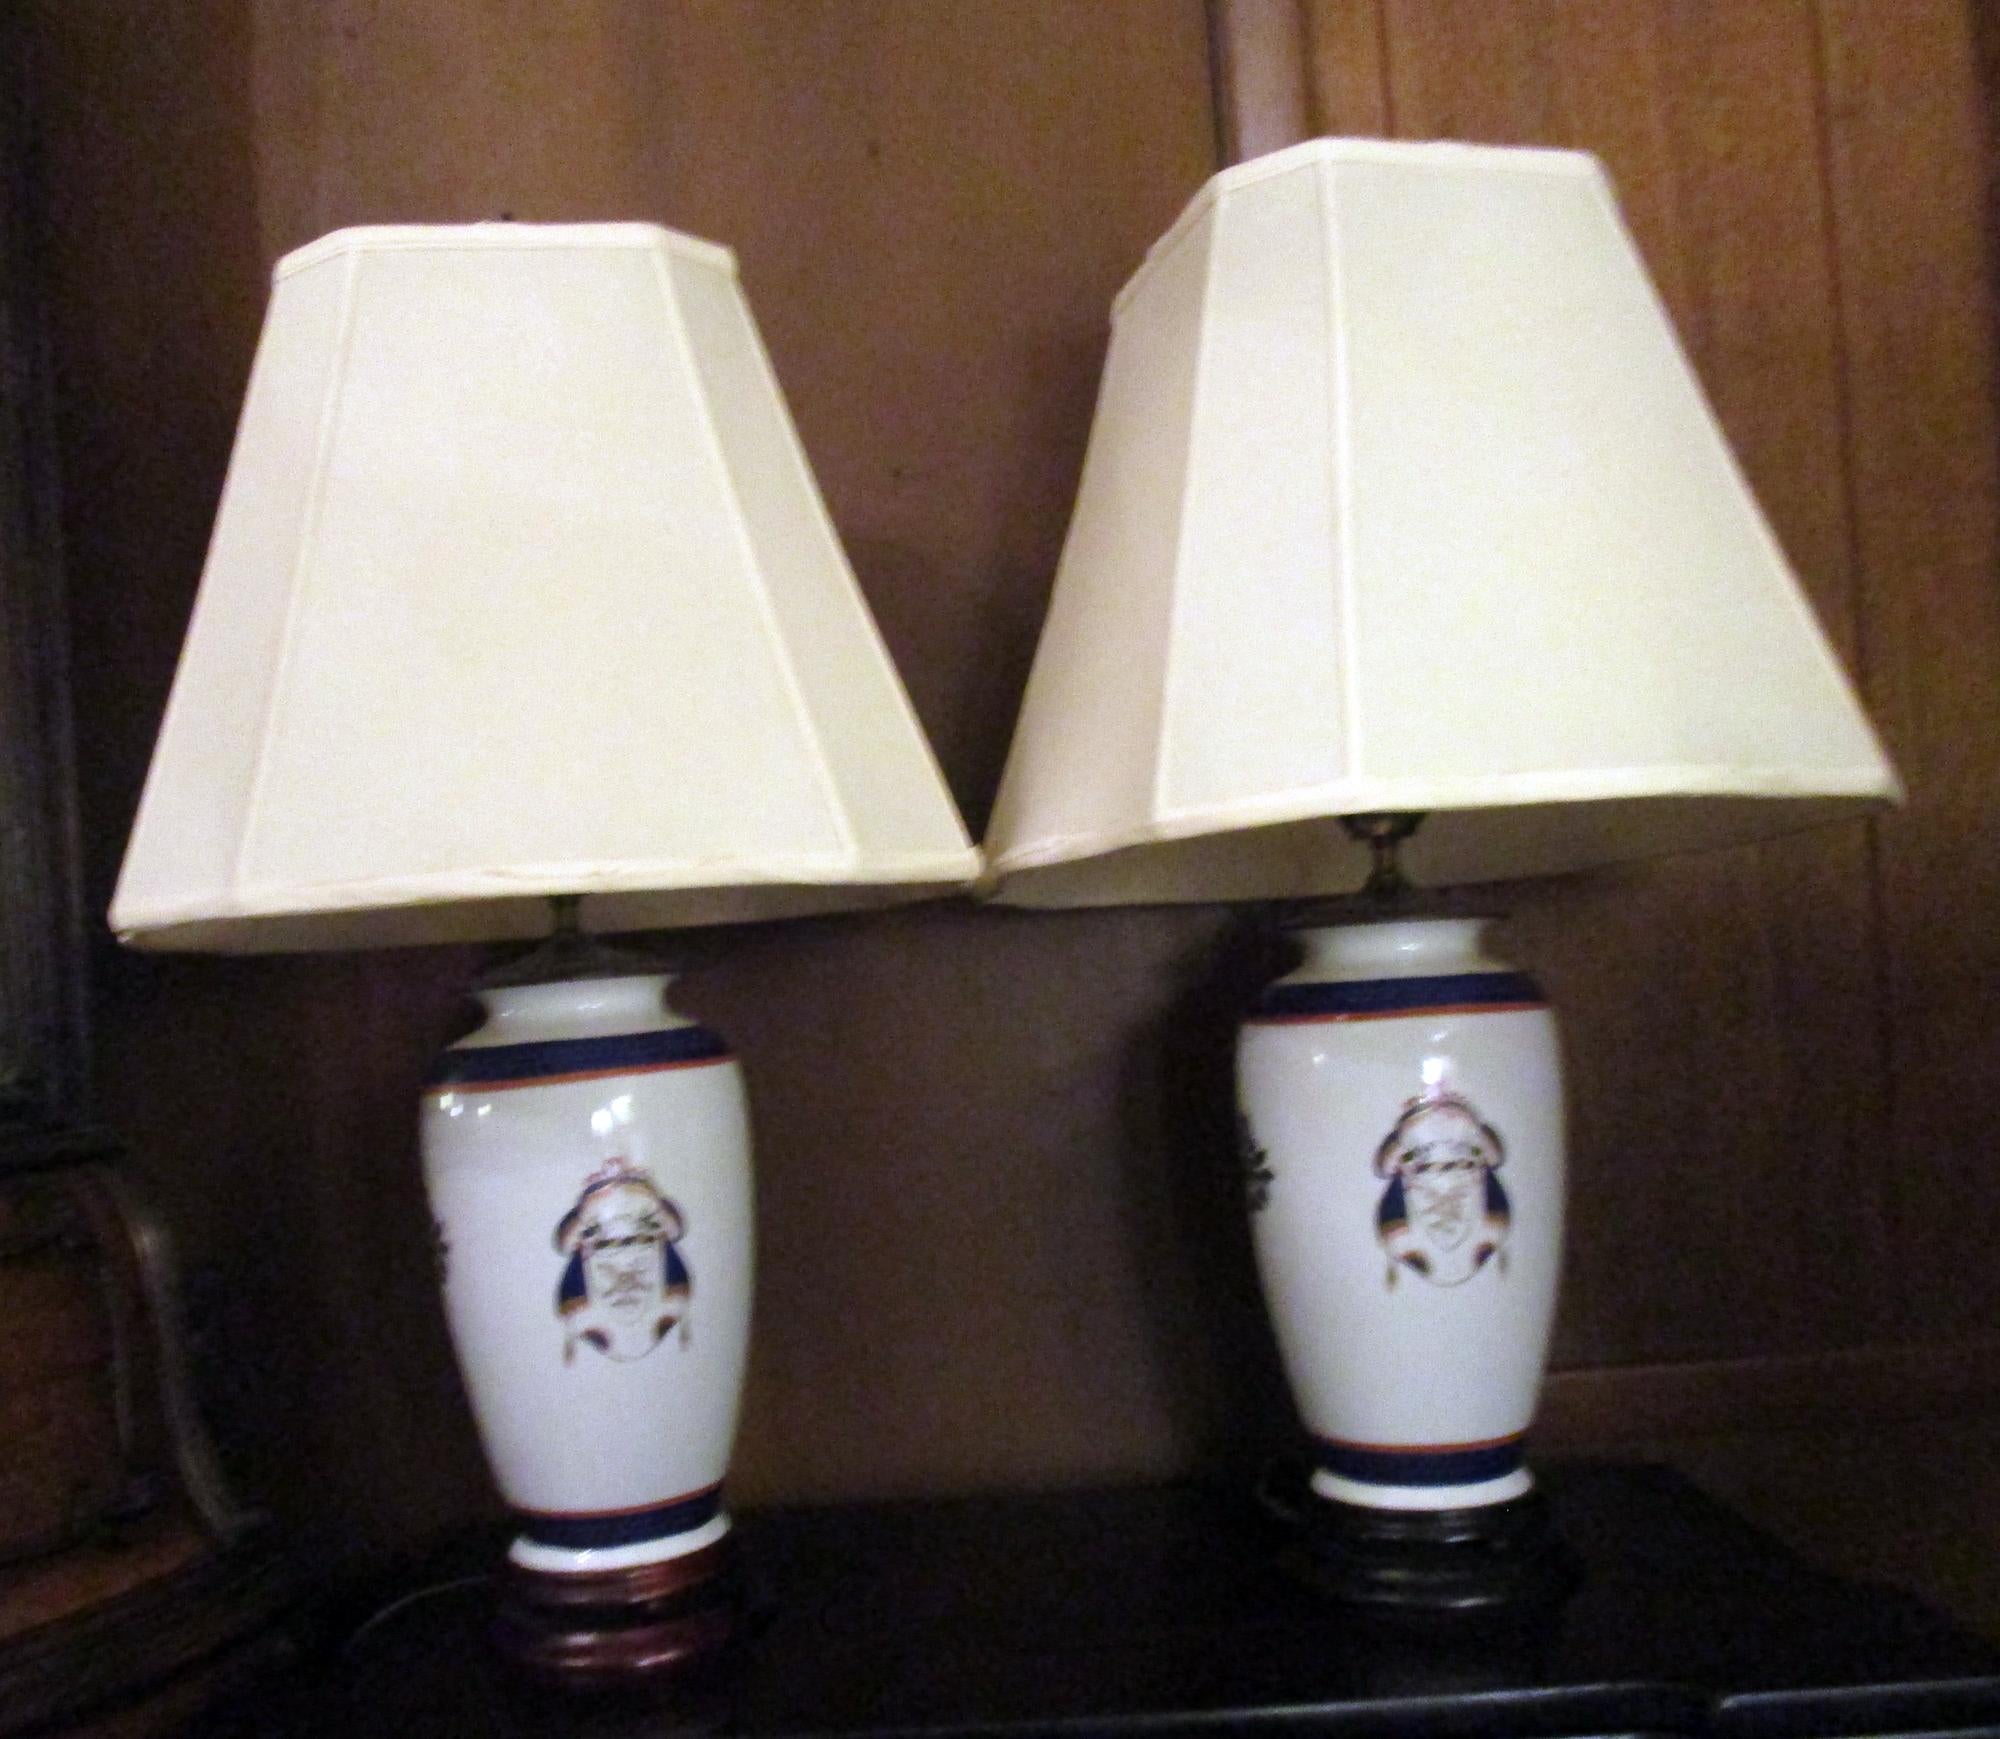 18th century Chinese Export Porcelain Vase Pair as Lamps 2